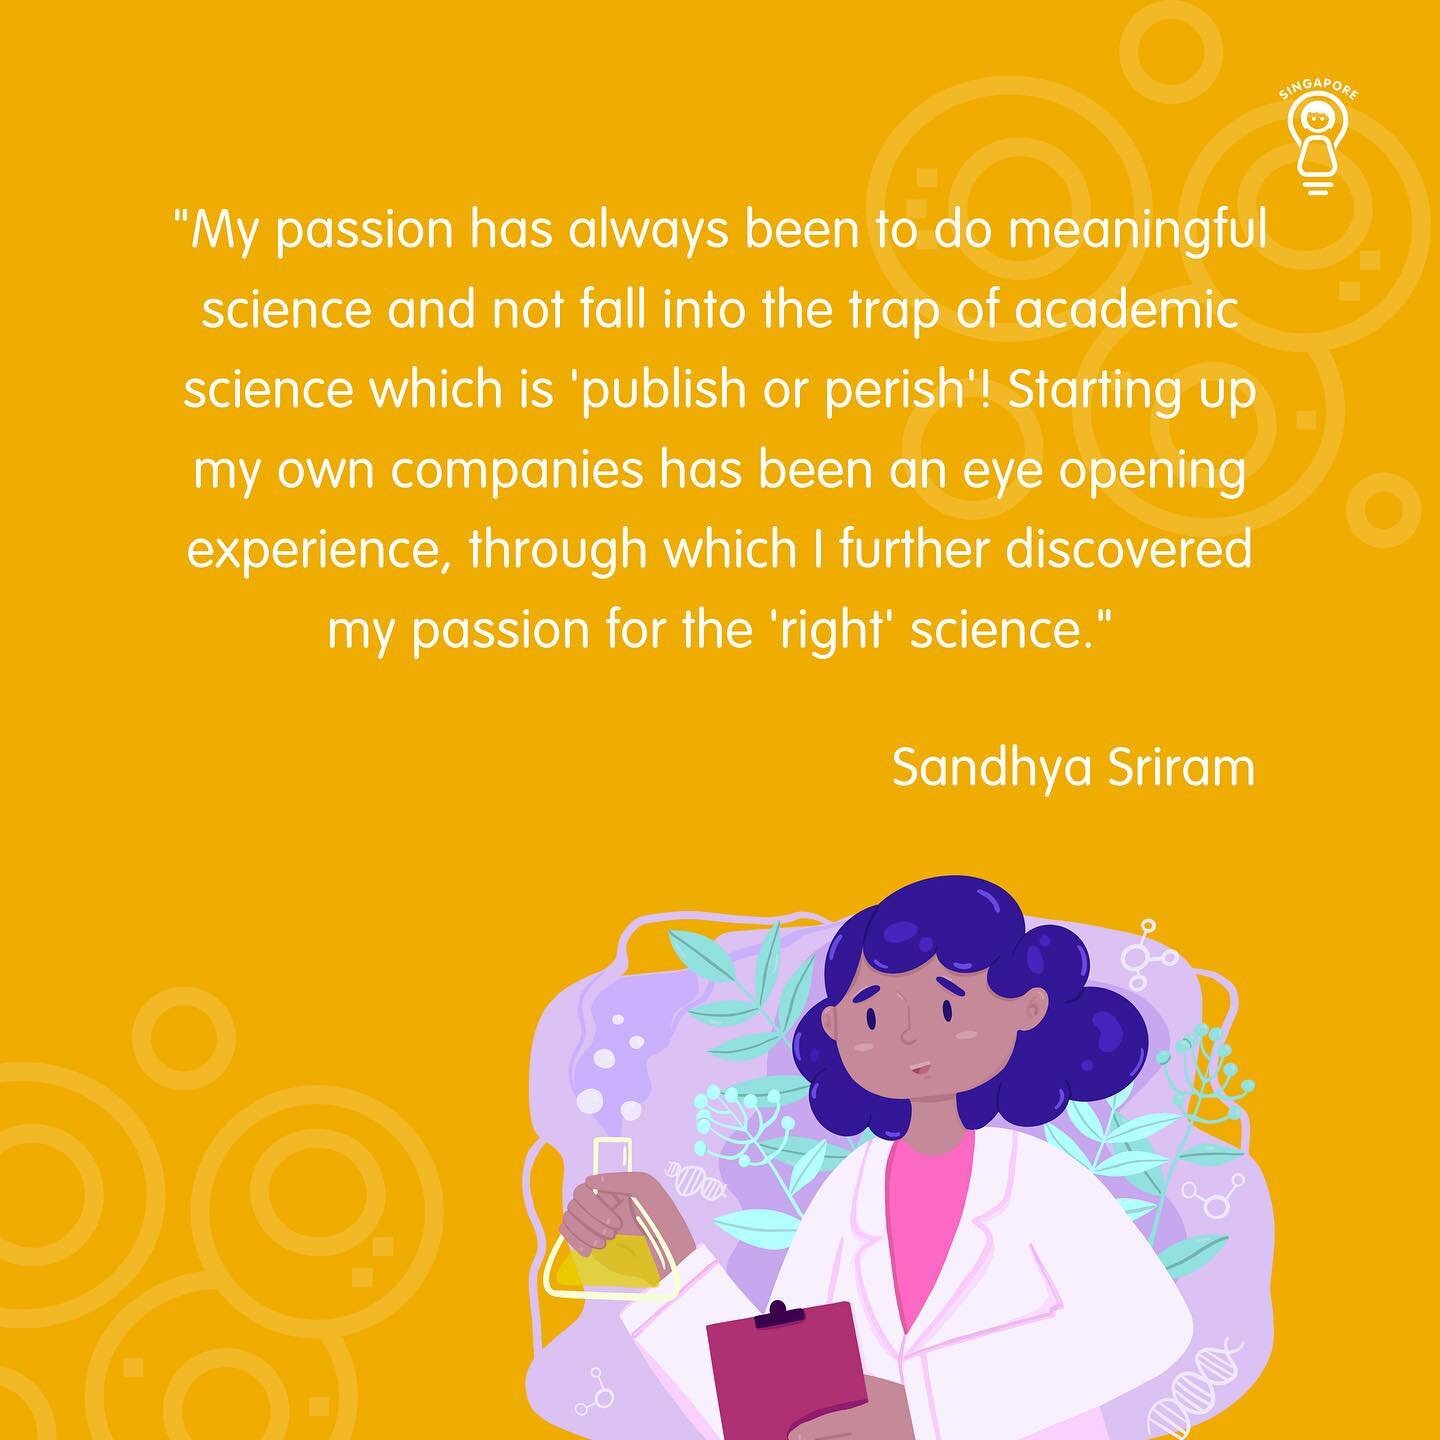 A stem cell scientist by training and education, Dr Sandhya Sriram thought about what she wanted to achieve in the next ten years to leave a mark in this world.

Combining her passion in biotech, stem cell research,  entrepreneurship and sustainabili